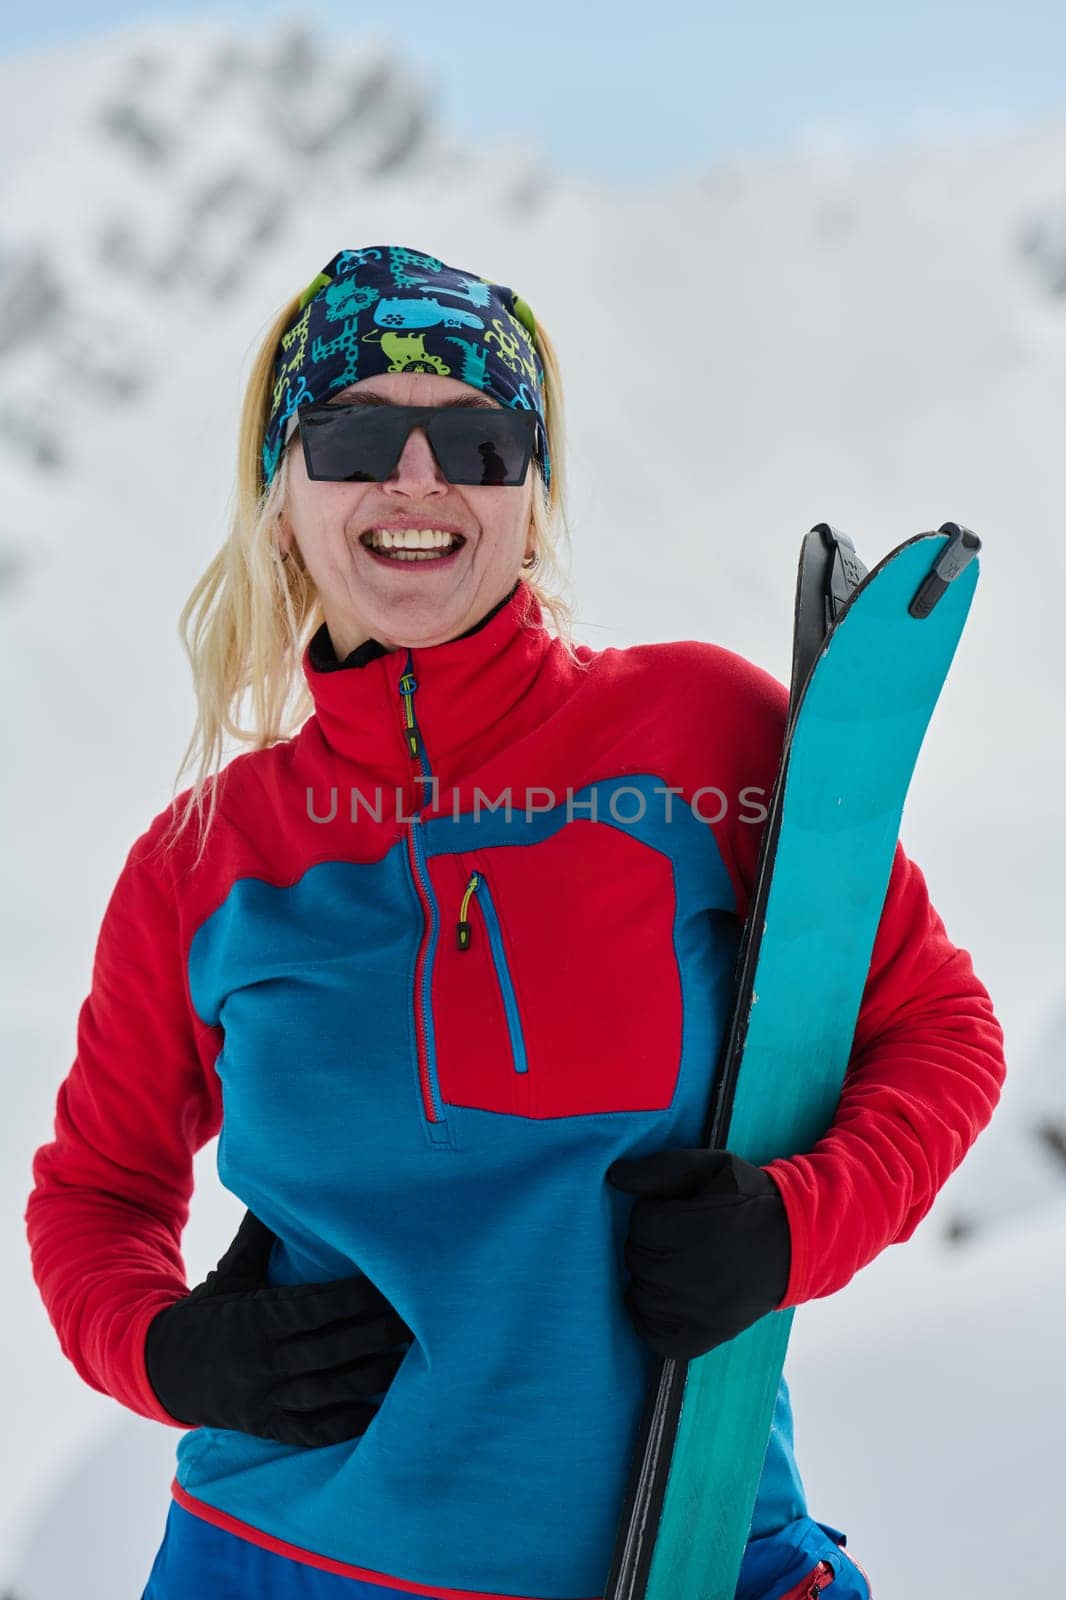 A Female Mountaineer Ascends the Alps with Backcountry Gear by dotshock